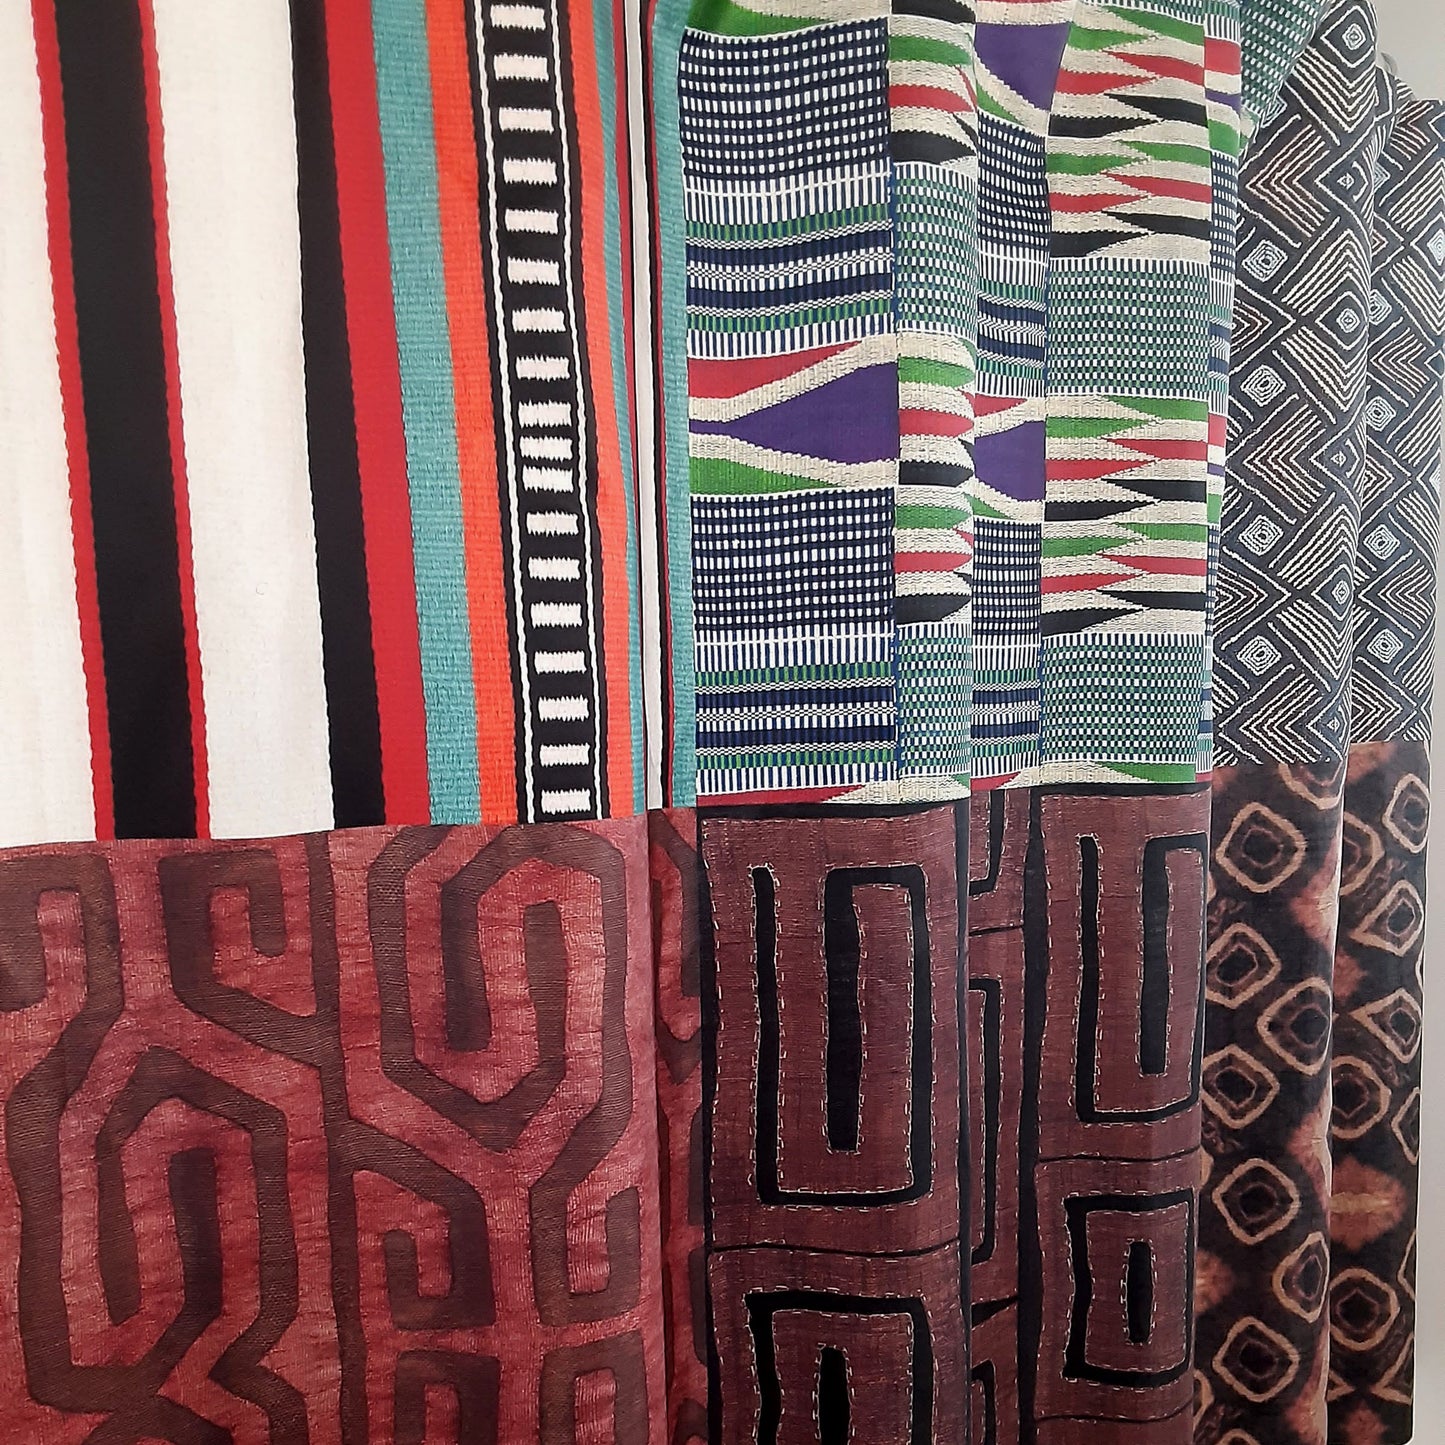 Shower Curtain Fabric Samples